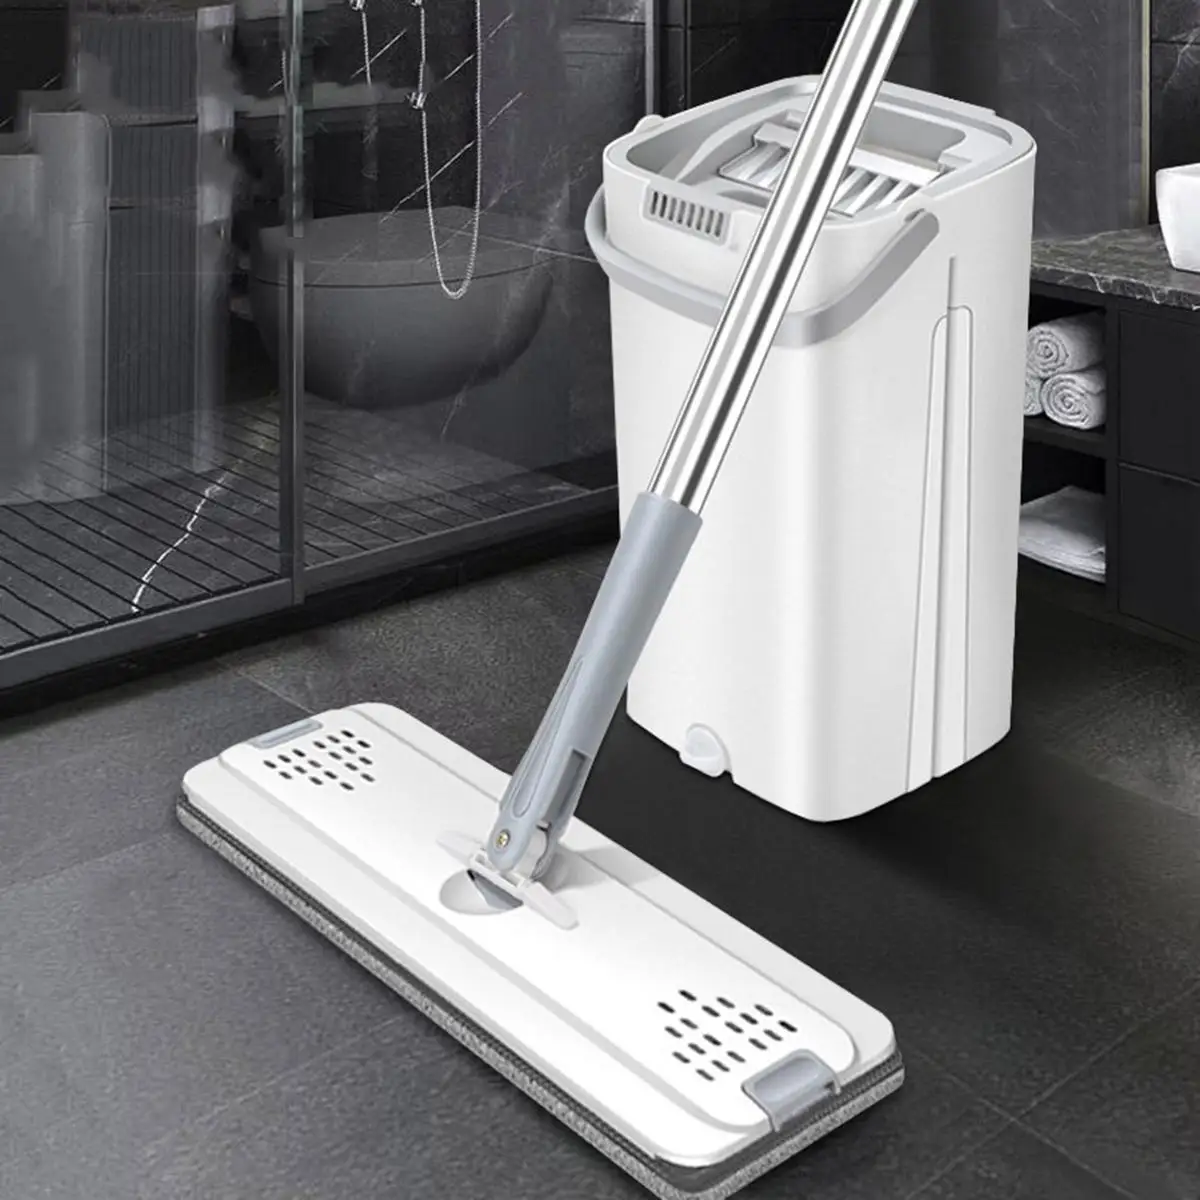 

Magic Flat Squeeze Mop with Bucket Household Floor Cleaning Mop Microfiber 360 Rotating Automatic Dewatering Broom Mop Tools